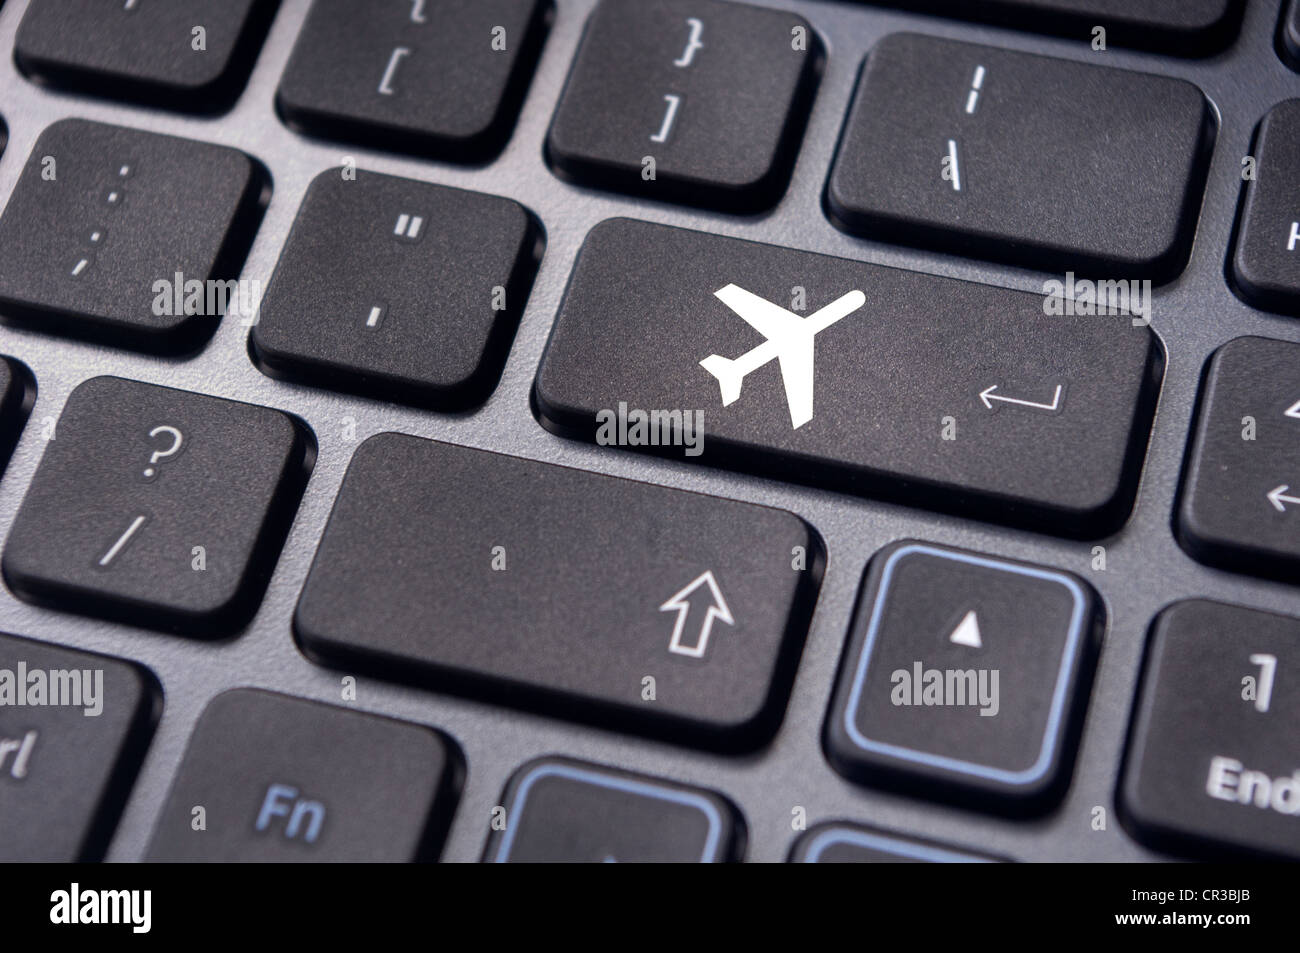 a plane sign on keyboard, to illustrate online booking or purchase of plane ticket or business travel concepts. Stock Photo